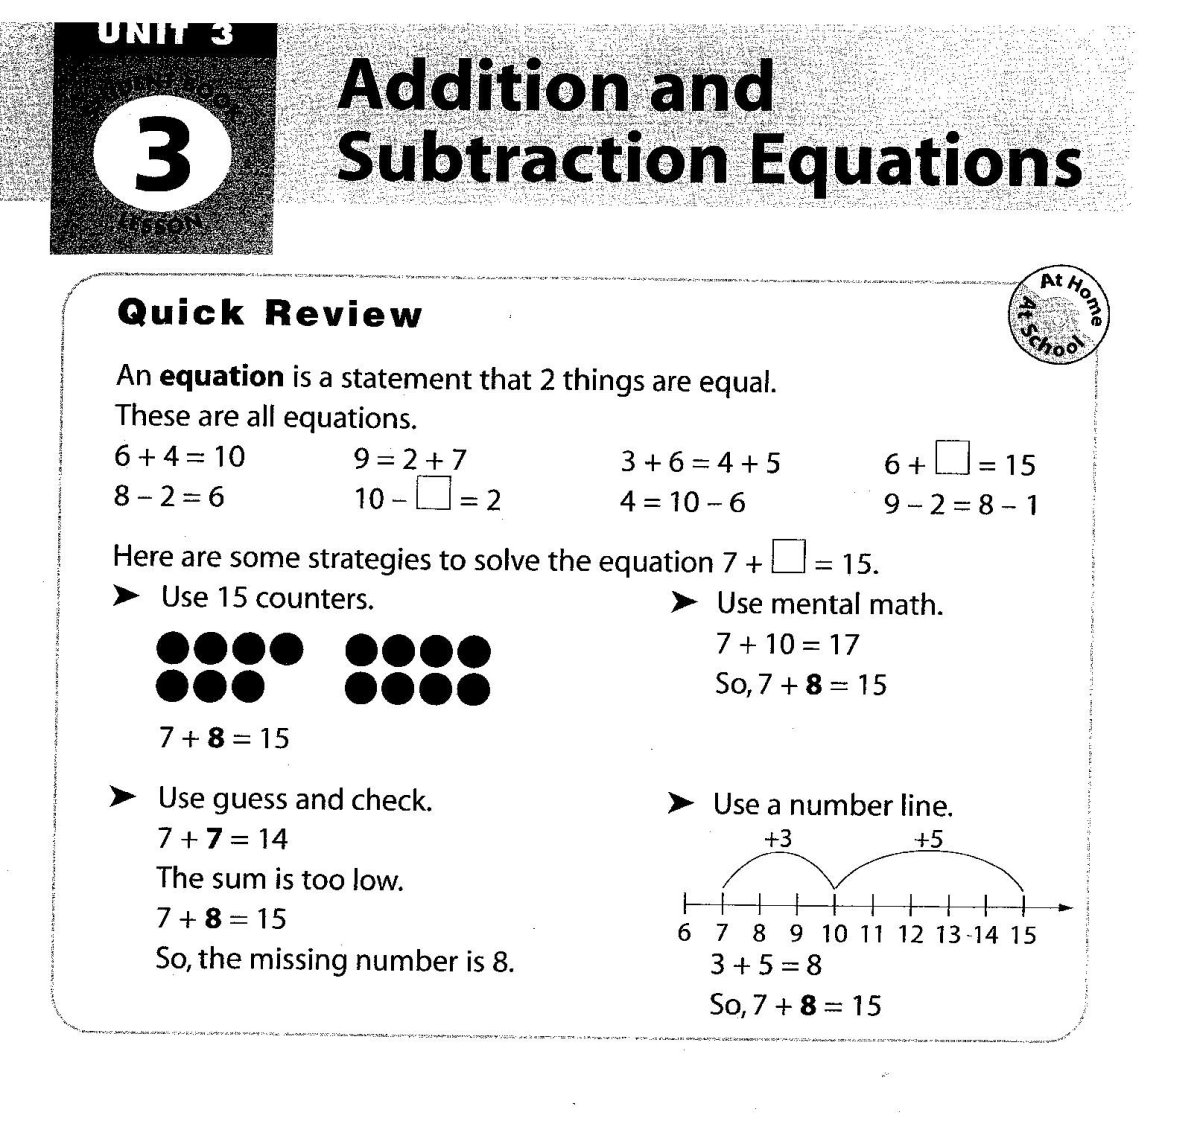 An example of a Grade 3 addition and subtraction lesson showing four different strategies to solve a simple equation.